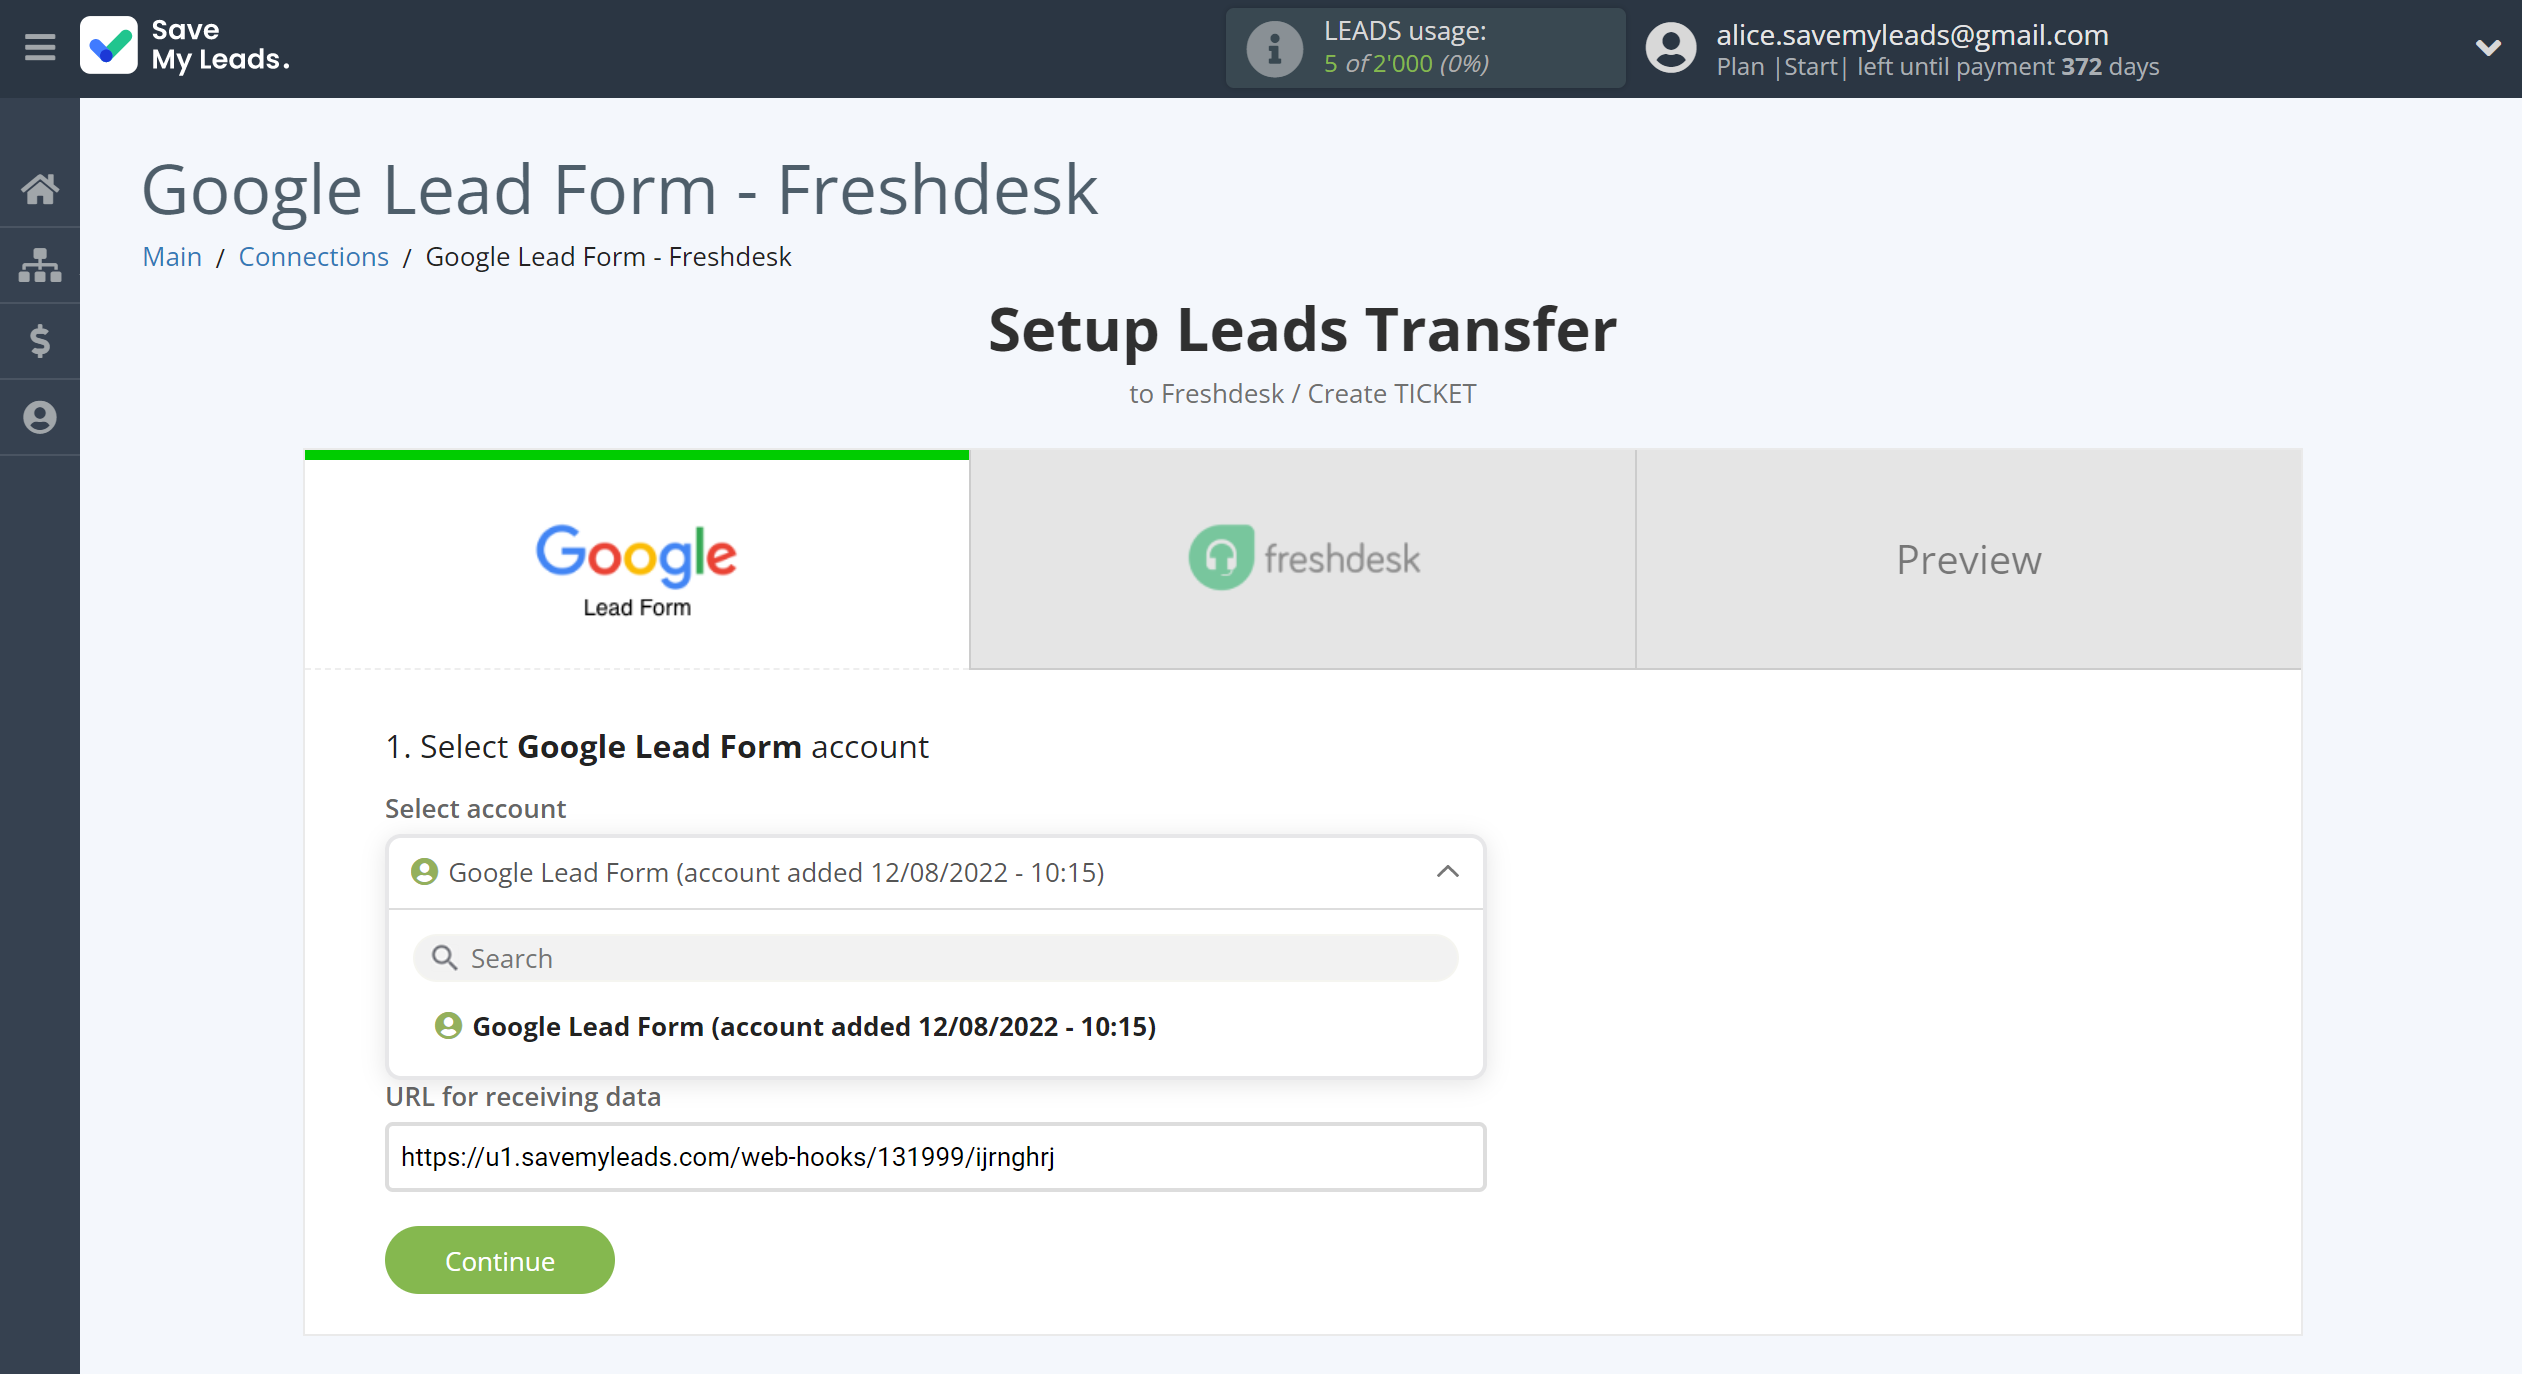 How to Connect Google Lead Form with Freshdesk Create Ticket | Data Source account selection